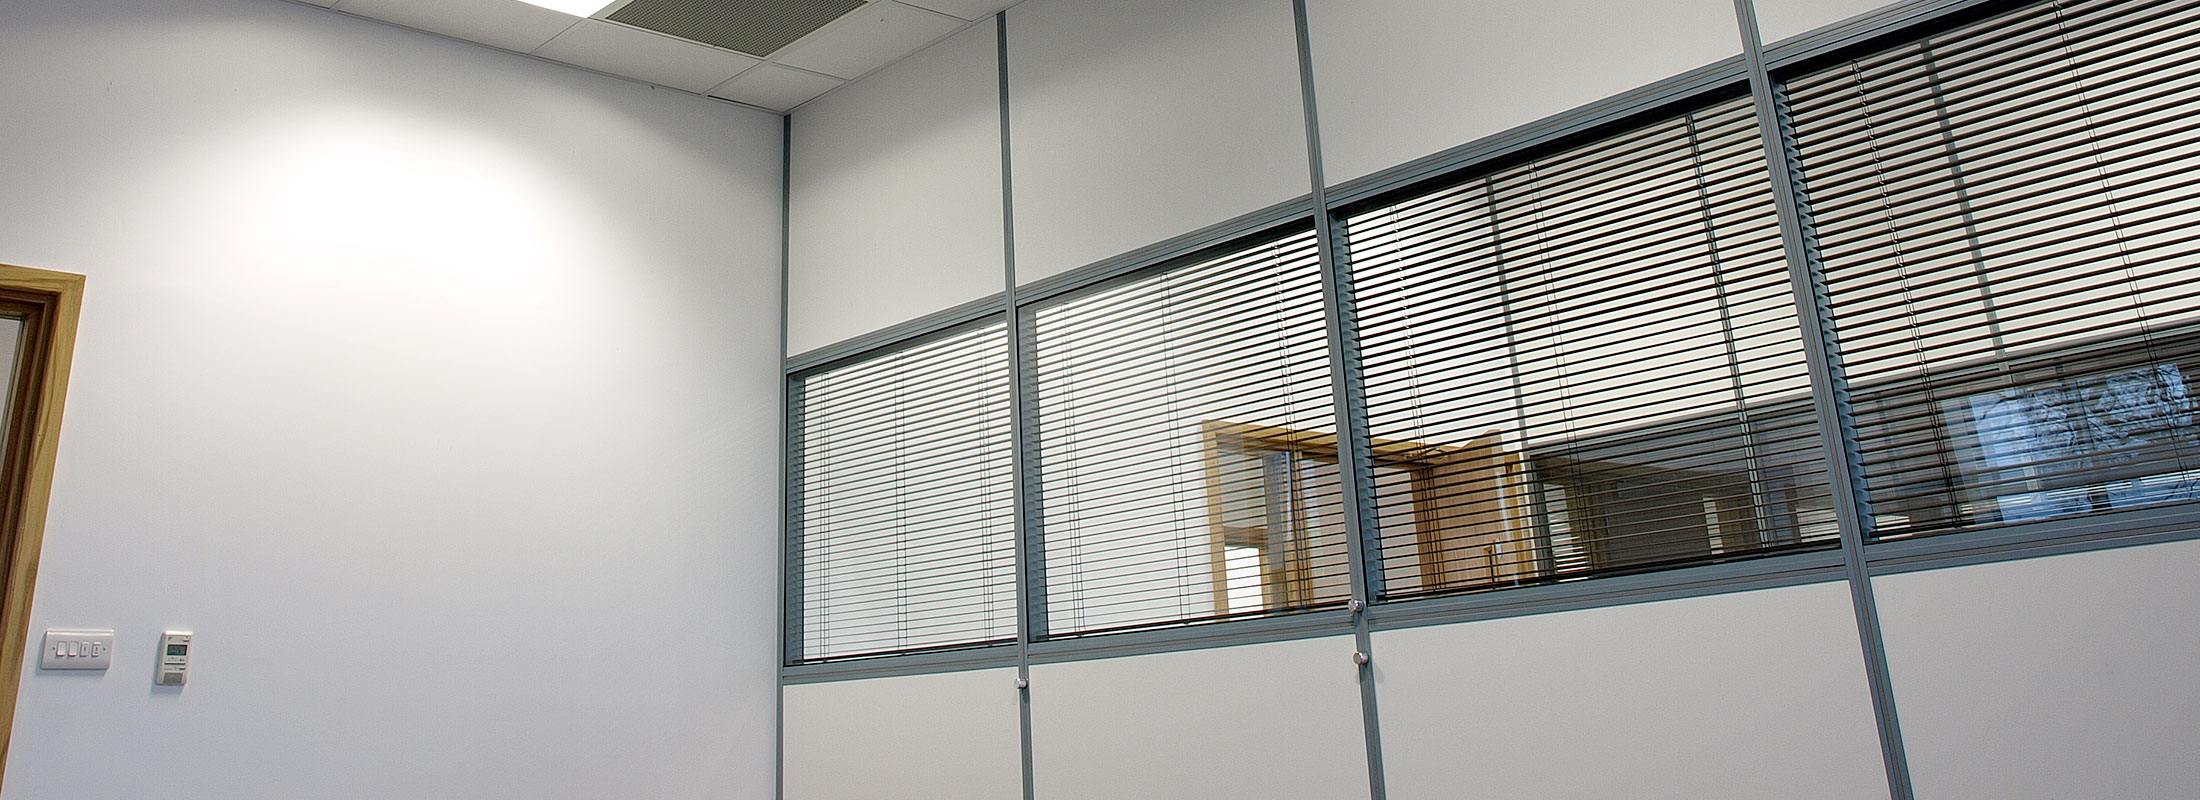 ASC | Partitioning-Installers-Suppliers-Fitters-Finishers-East Anglia